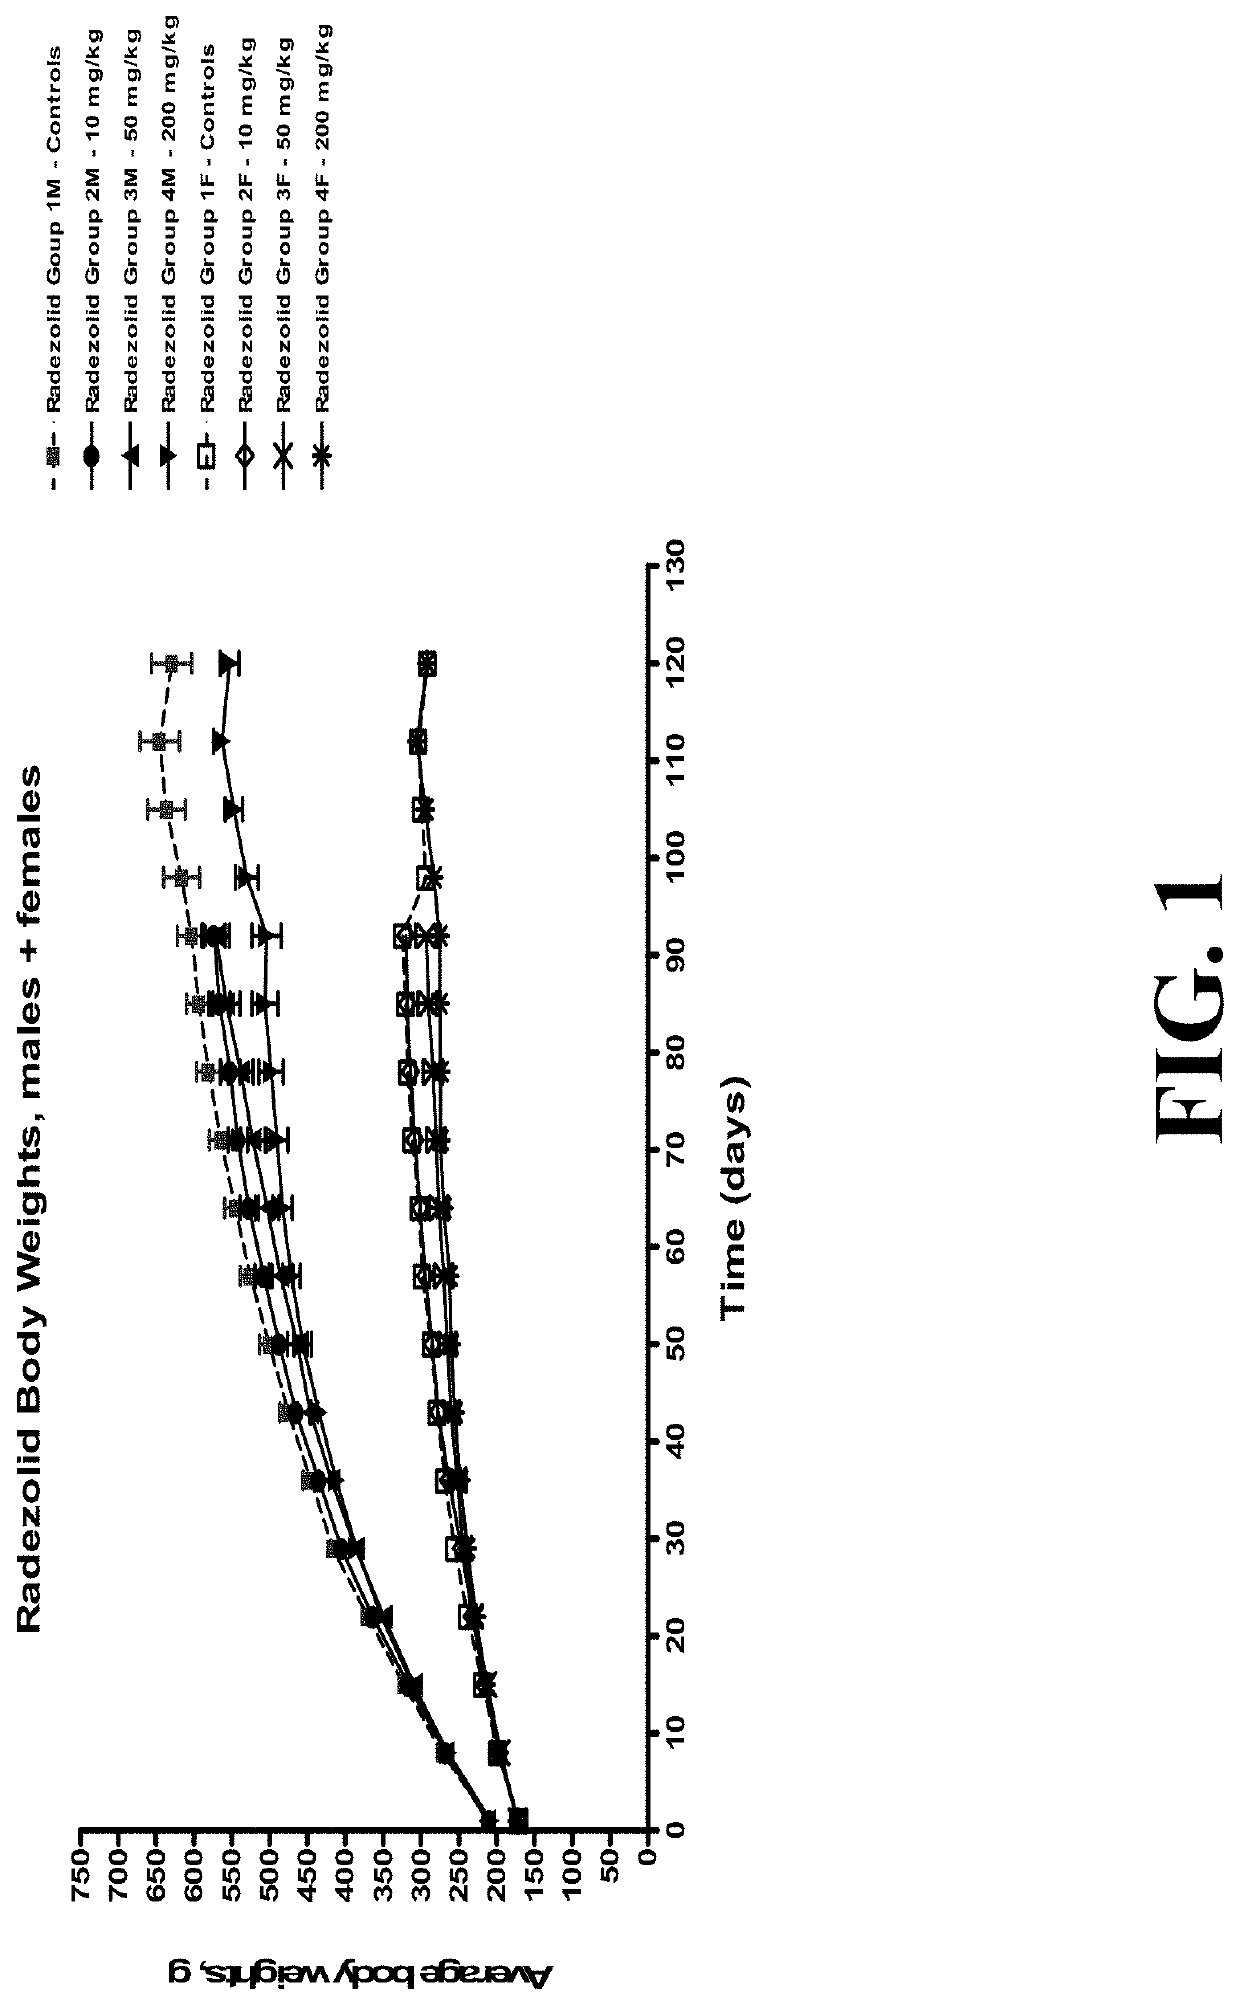 Topical formulations of biaryl heterocyclic compounds and methods of use thereof